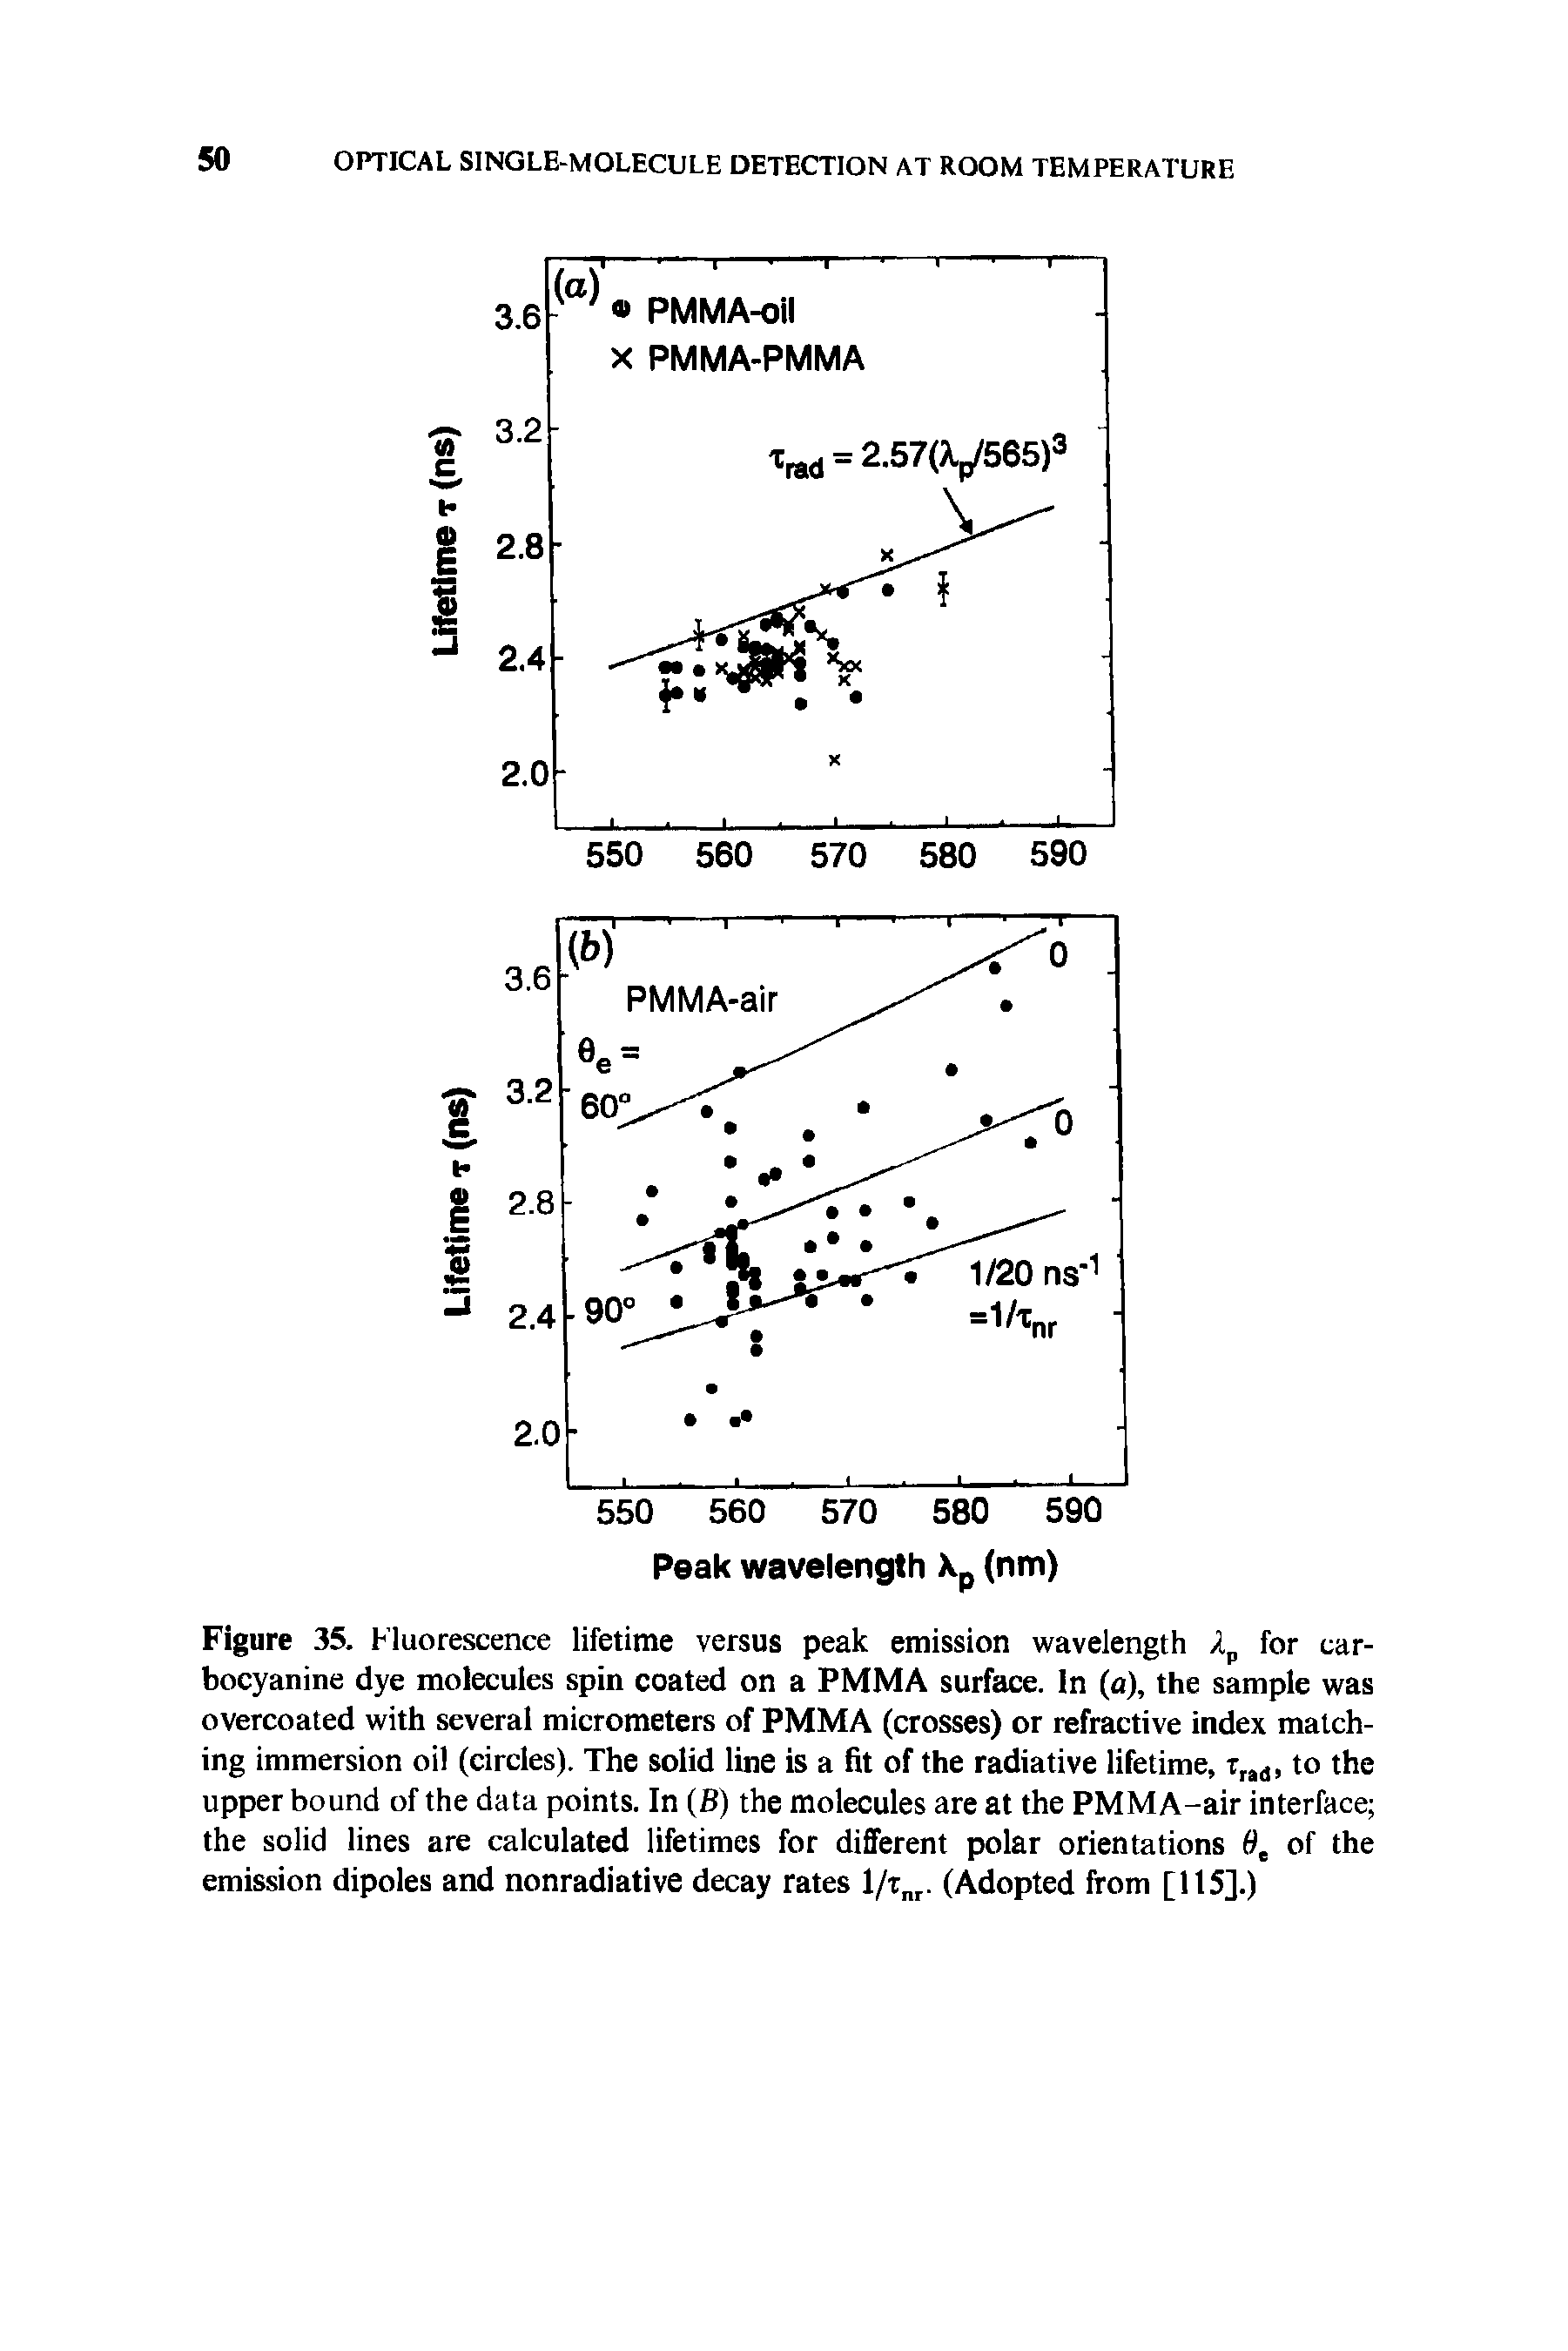 Figure 35. Fluorescence lifetime versus peak emission wavelength /p for car-bocyanine dye molecules spin coated on a PMMA surface. In (a), the sample was overcoated with several micrometers of PMMA (crosses) or refractive index matching immersion oil (circles). The solid line is a fit of the radiative lifetime, Trad, to the upper bound of the data points. In (B) the molecules are at the PMMA-air interface the solid lines are calculated lifetimes for different polar orientations 6t of the emission dipoles and nonradiative decay rates l/tnr. (Adopted from [115].)...